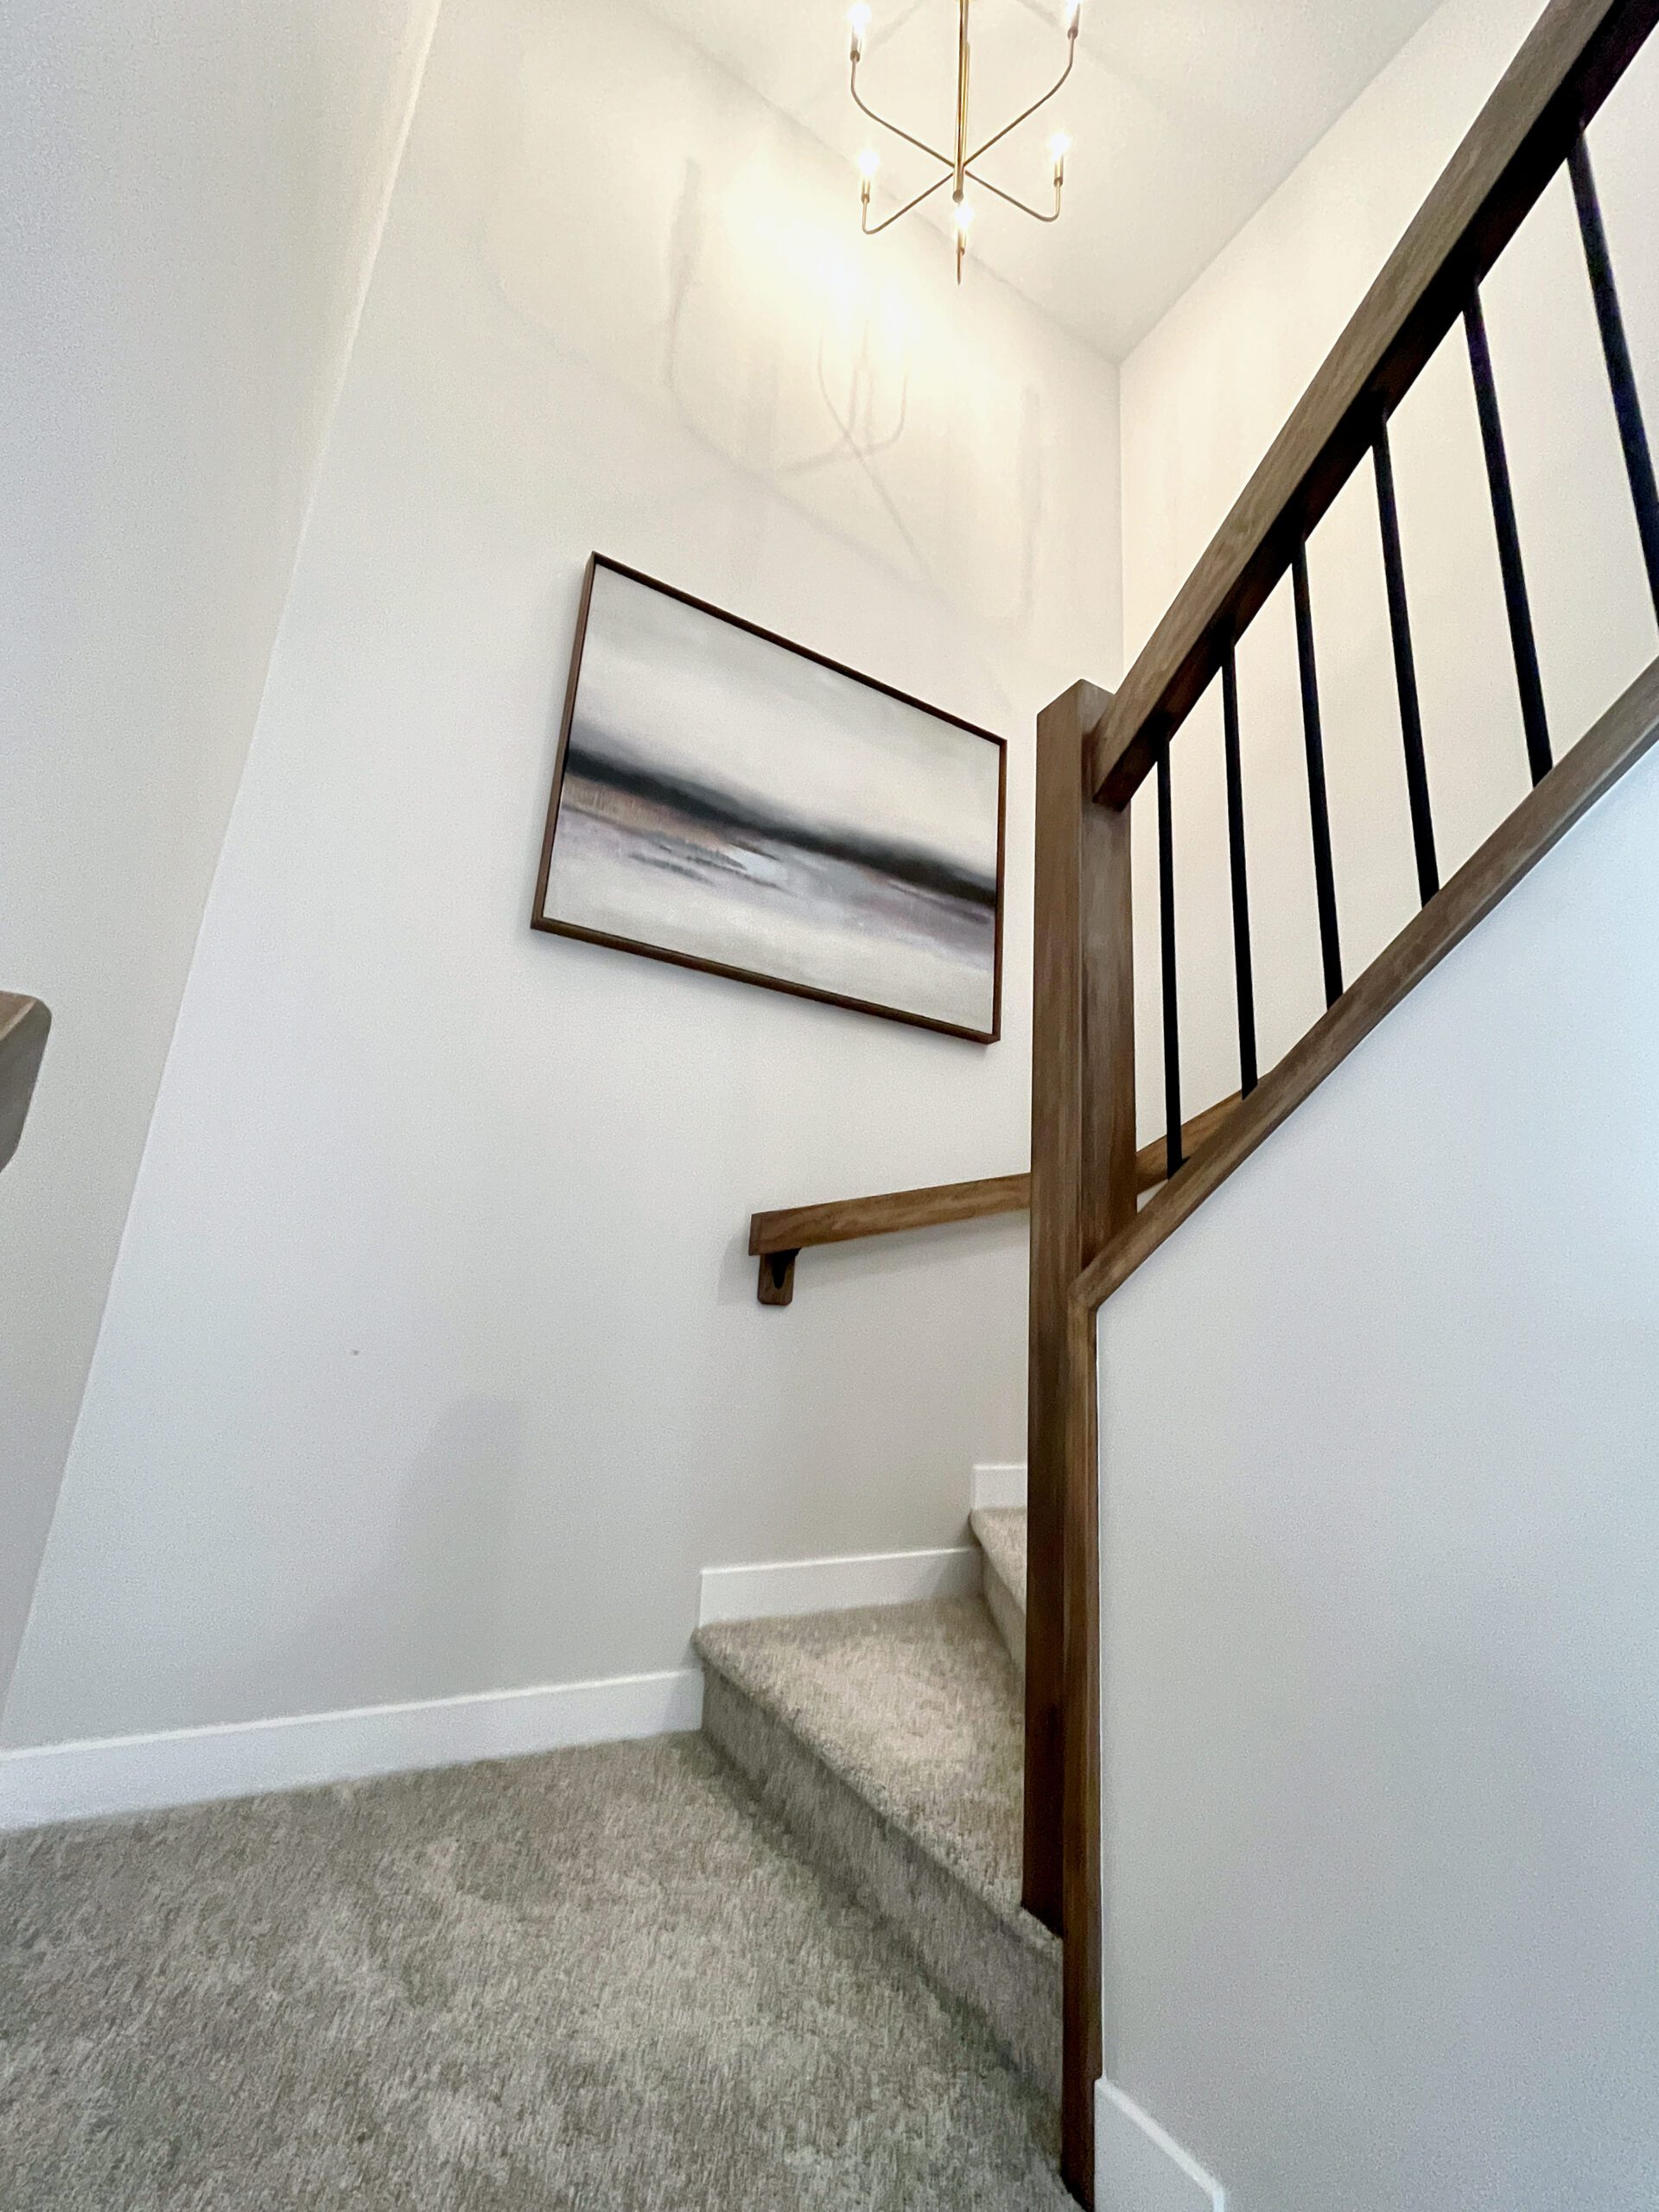 A staircase in a home with a painting on the wall.